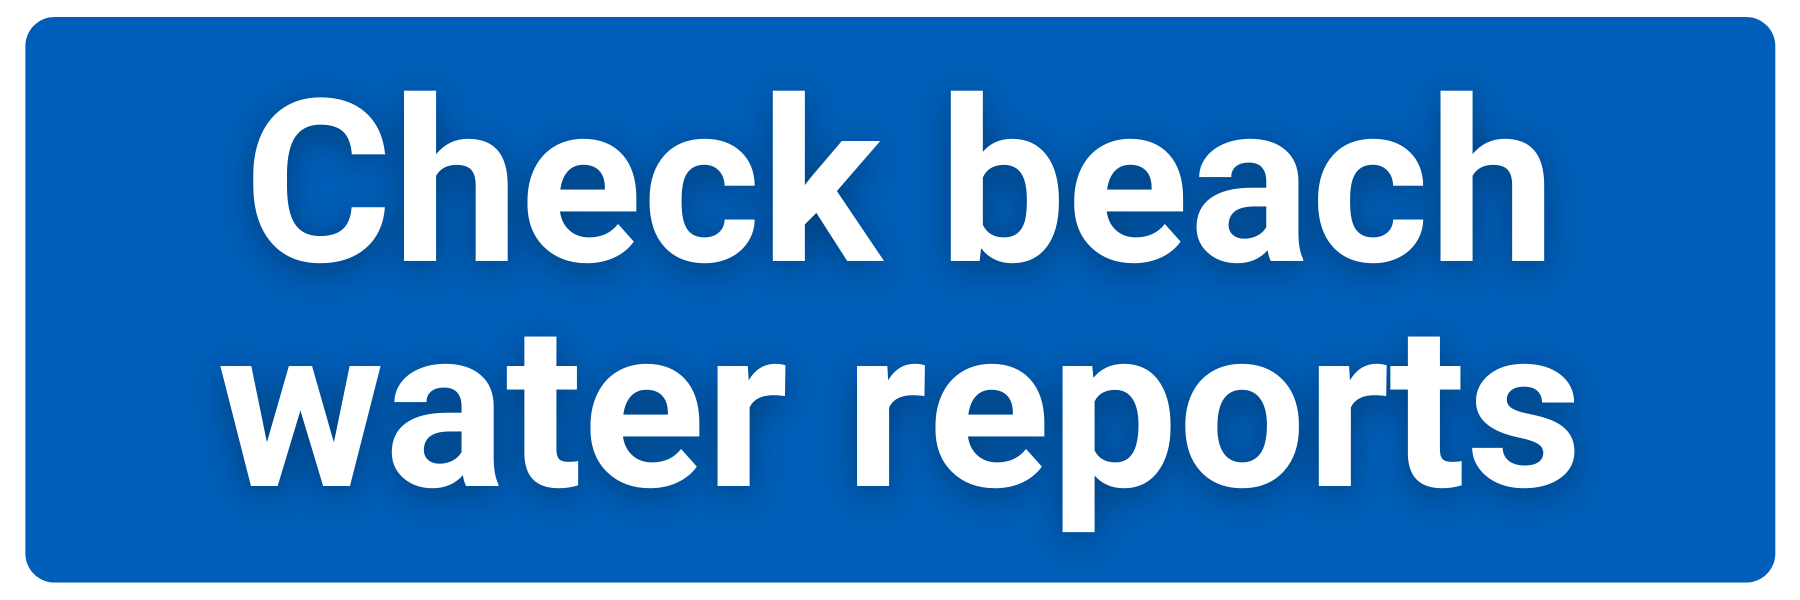 blue button that says "check beach water reports"